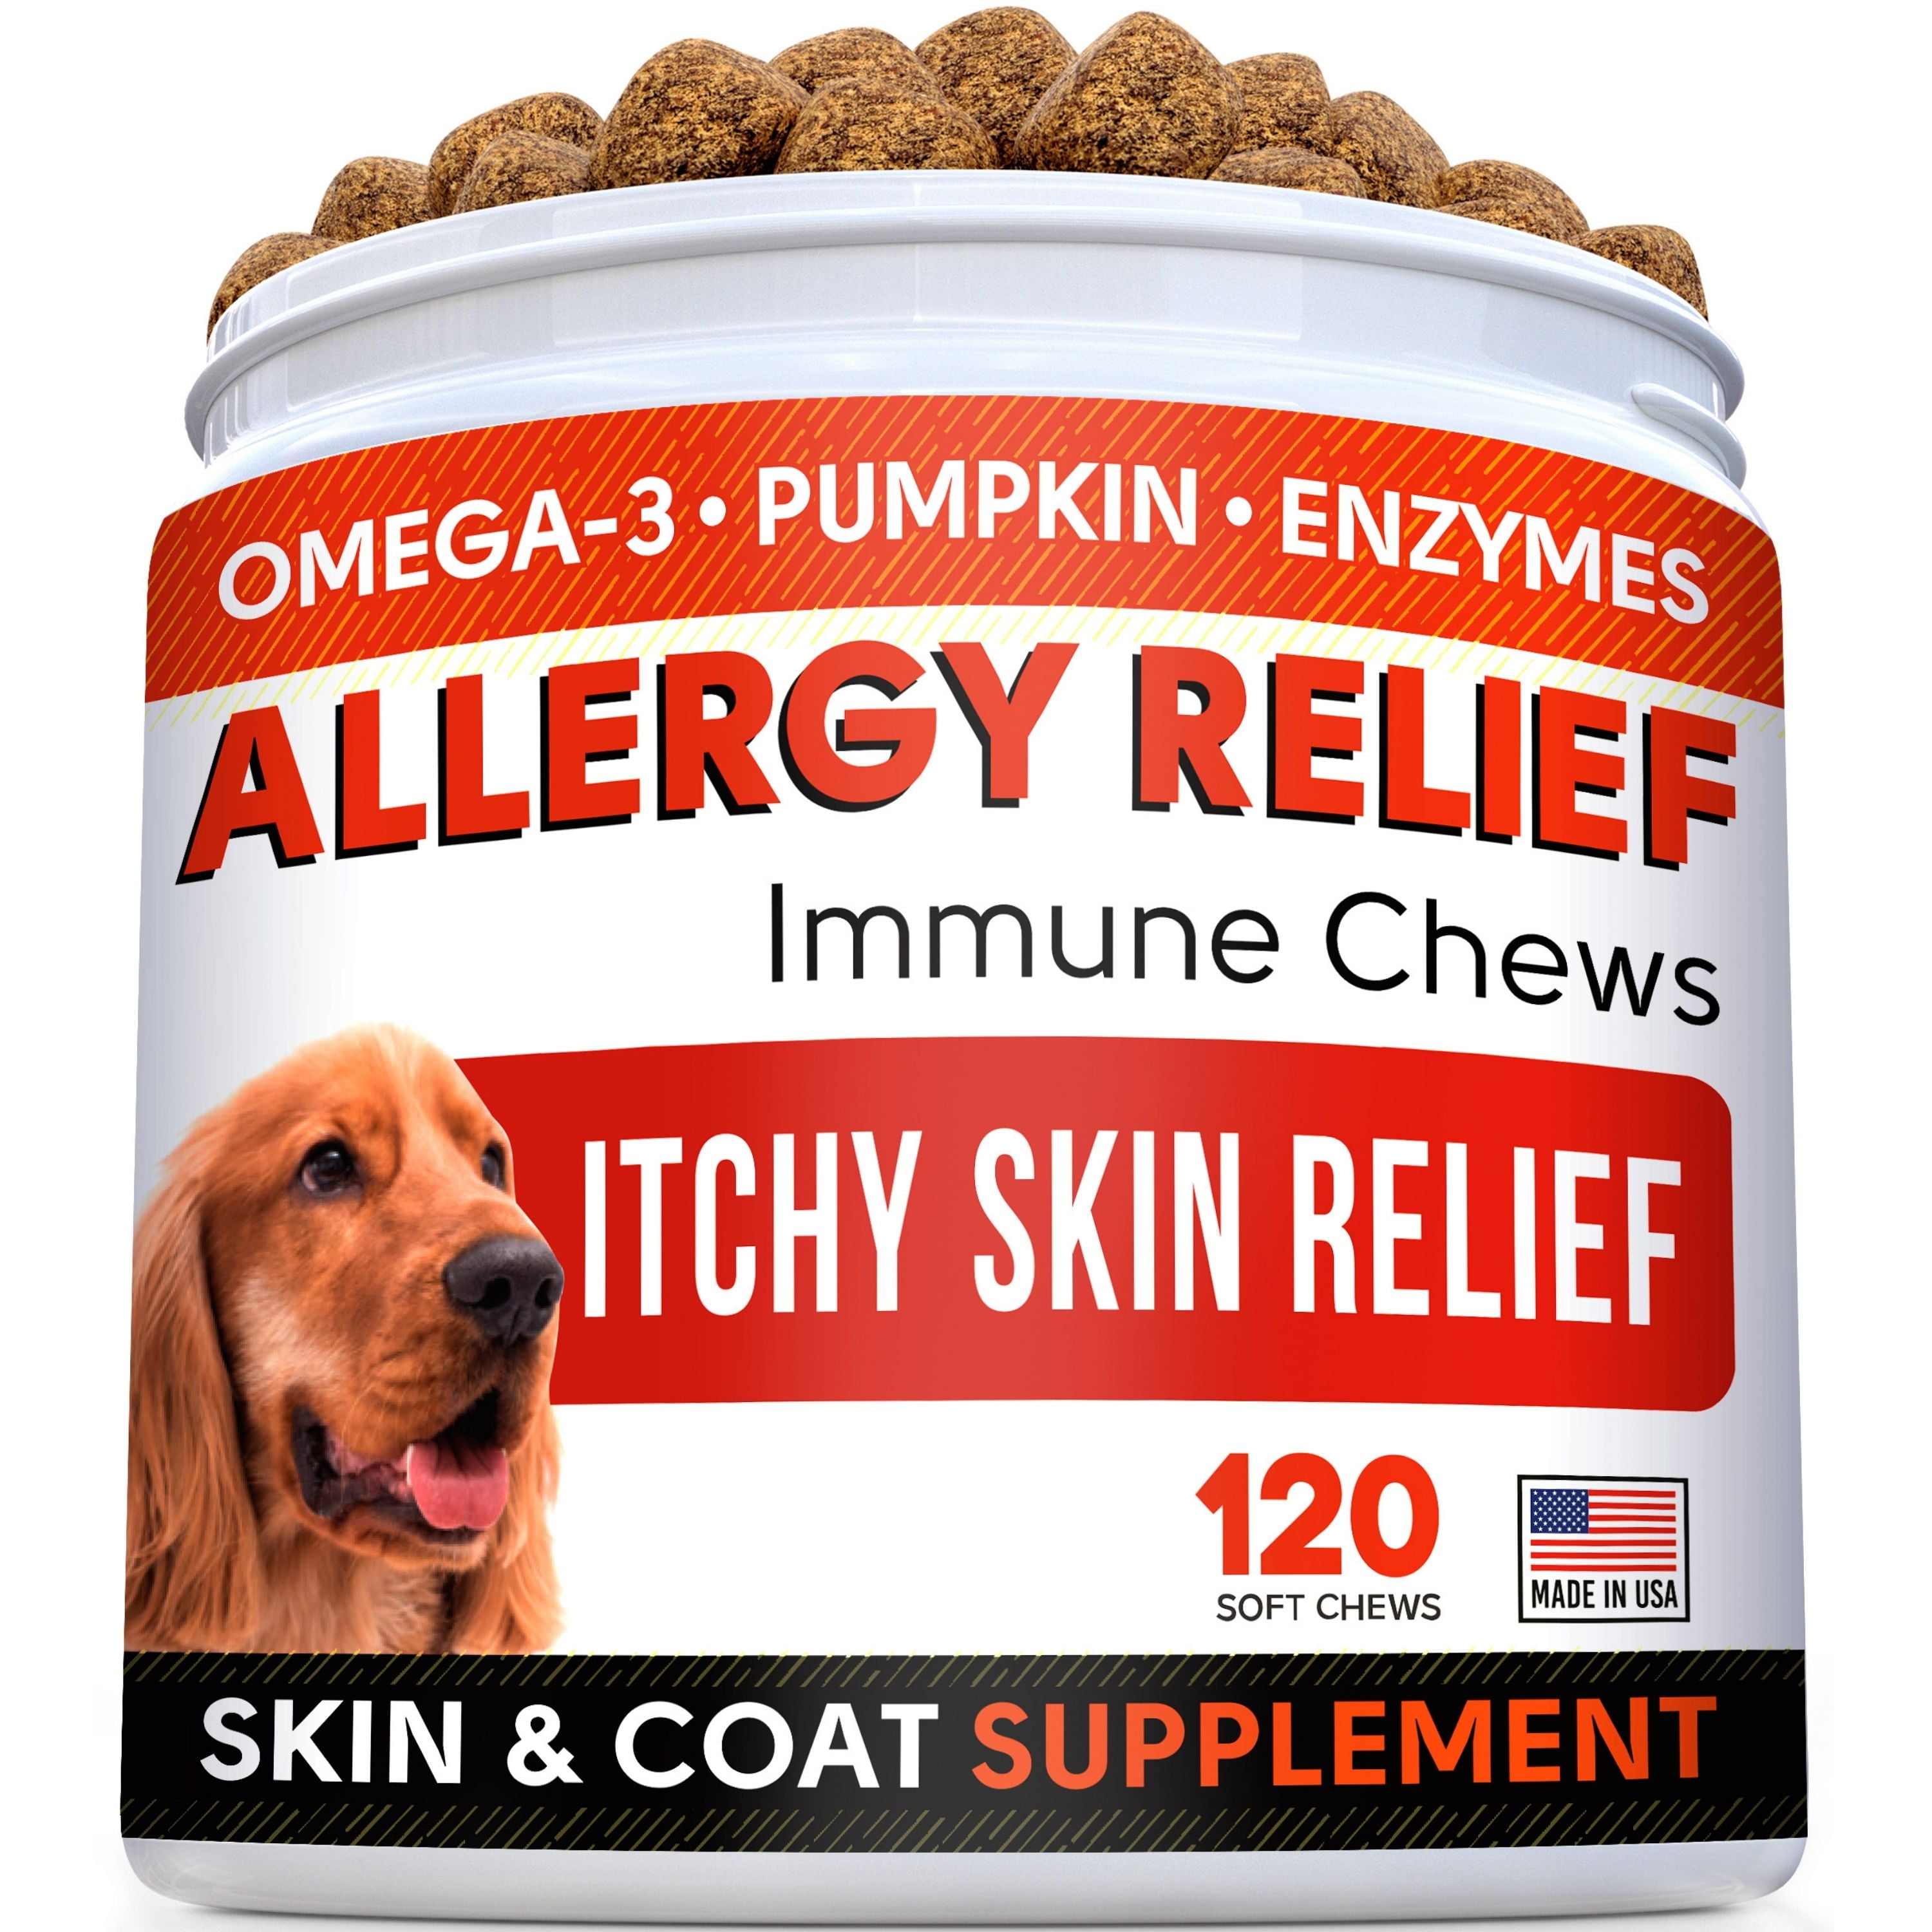 Allergy Relief Chews for Dogs with Omega 3 Itchy Skin